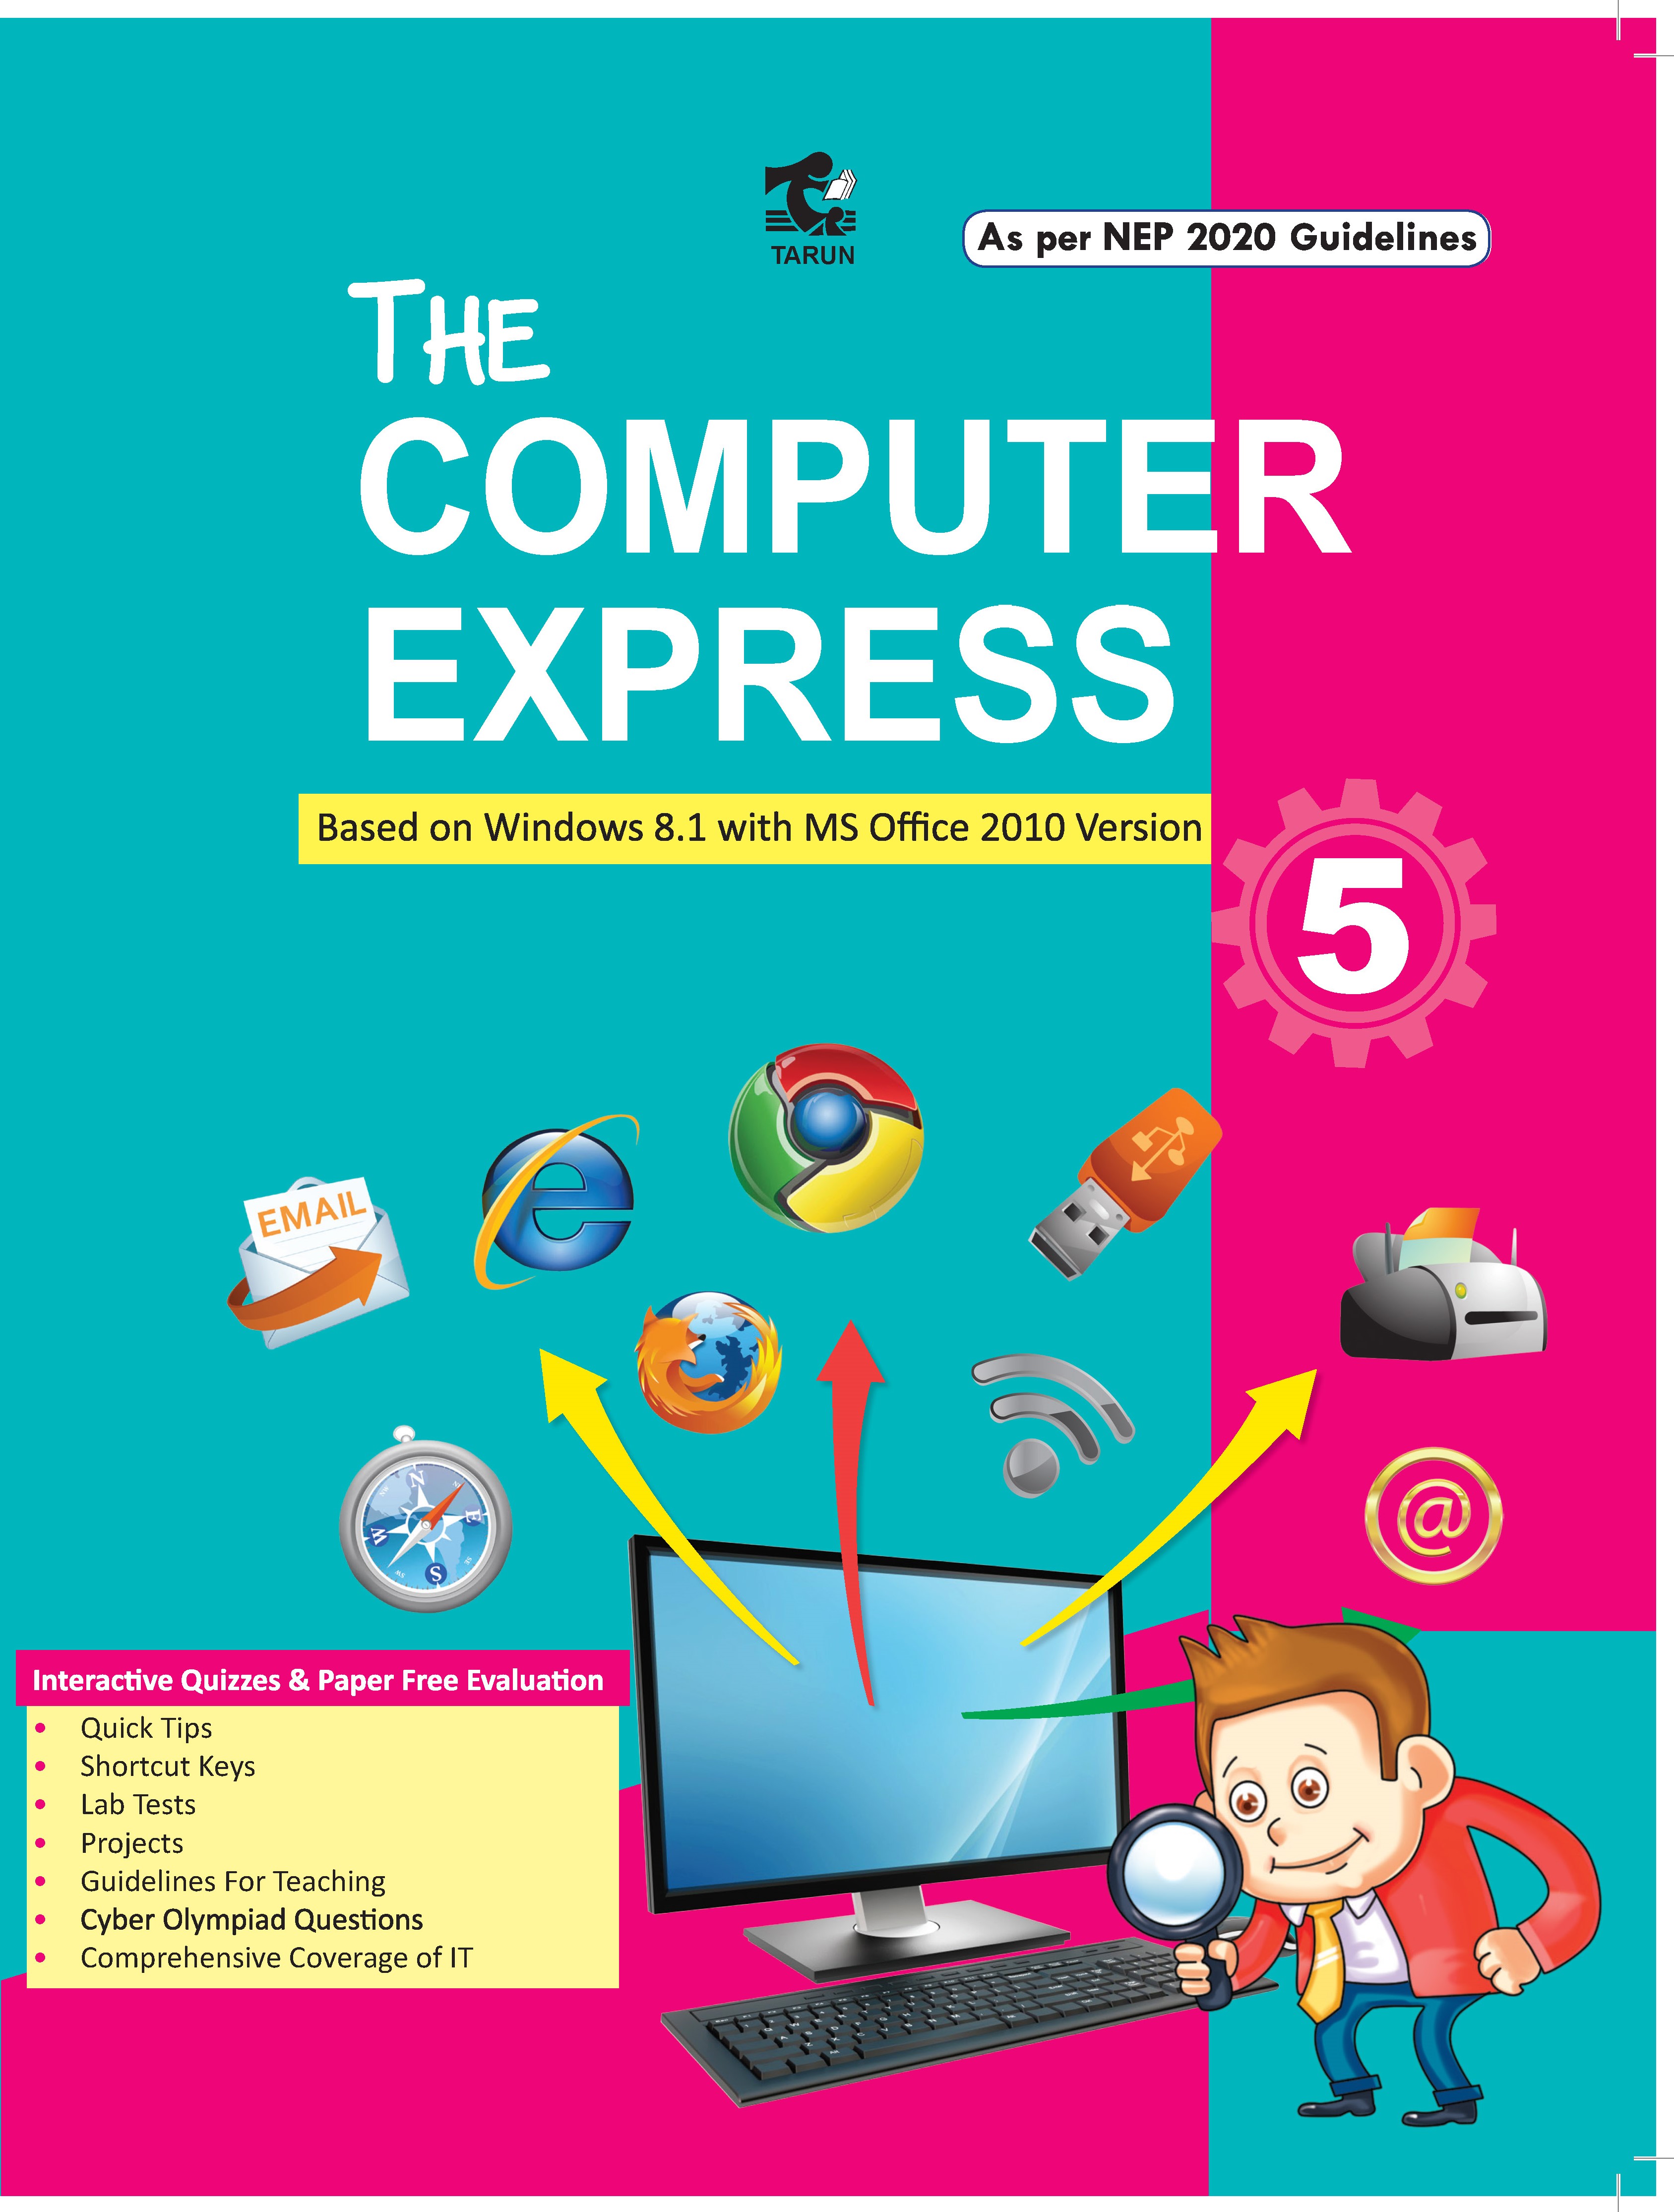 THE COMPUTER EXPRESS 5